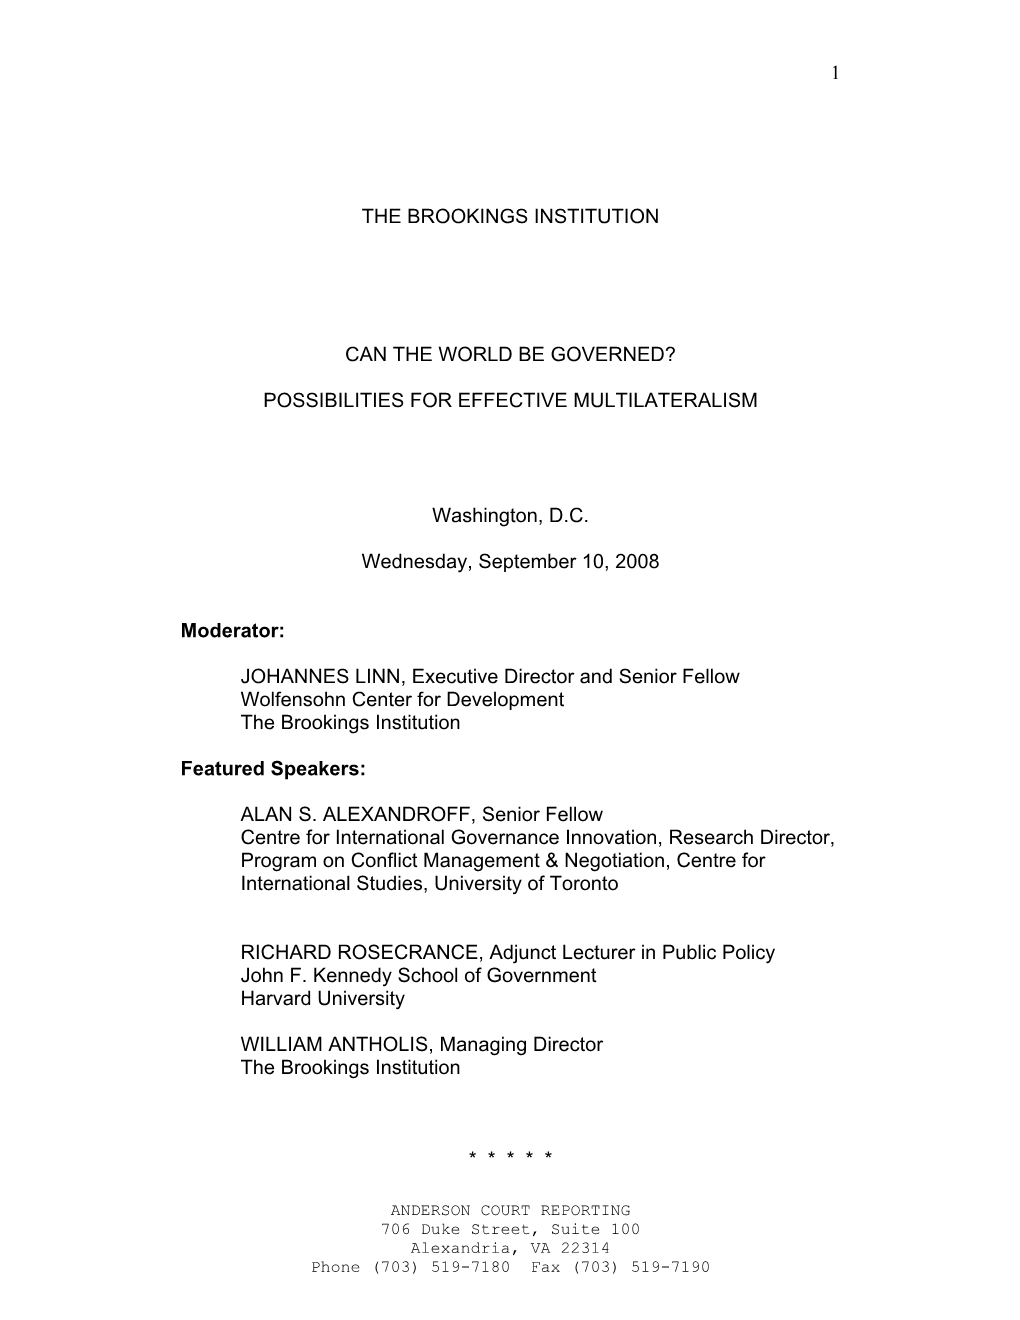 1 the BROOKINGS INSTITUTION CAN the WORLD BE GOVERNED? POSSIBILITIES for EFFECTIVE MULTILATERALISM Washington, D.C. Wednesday, S